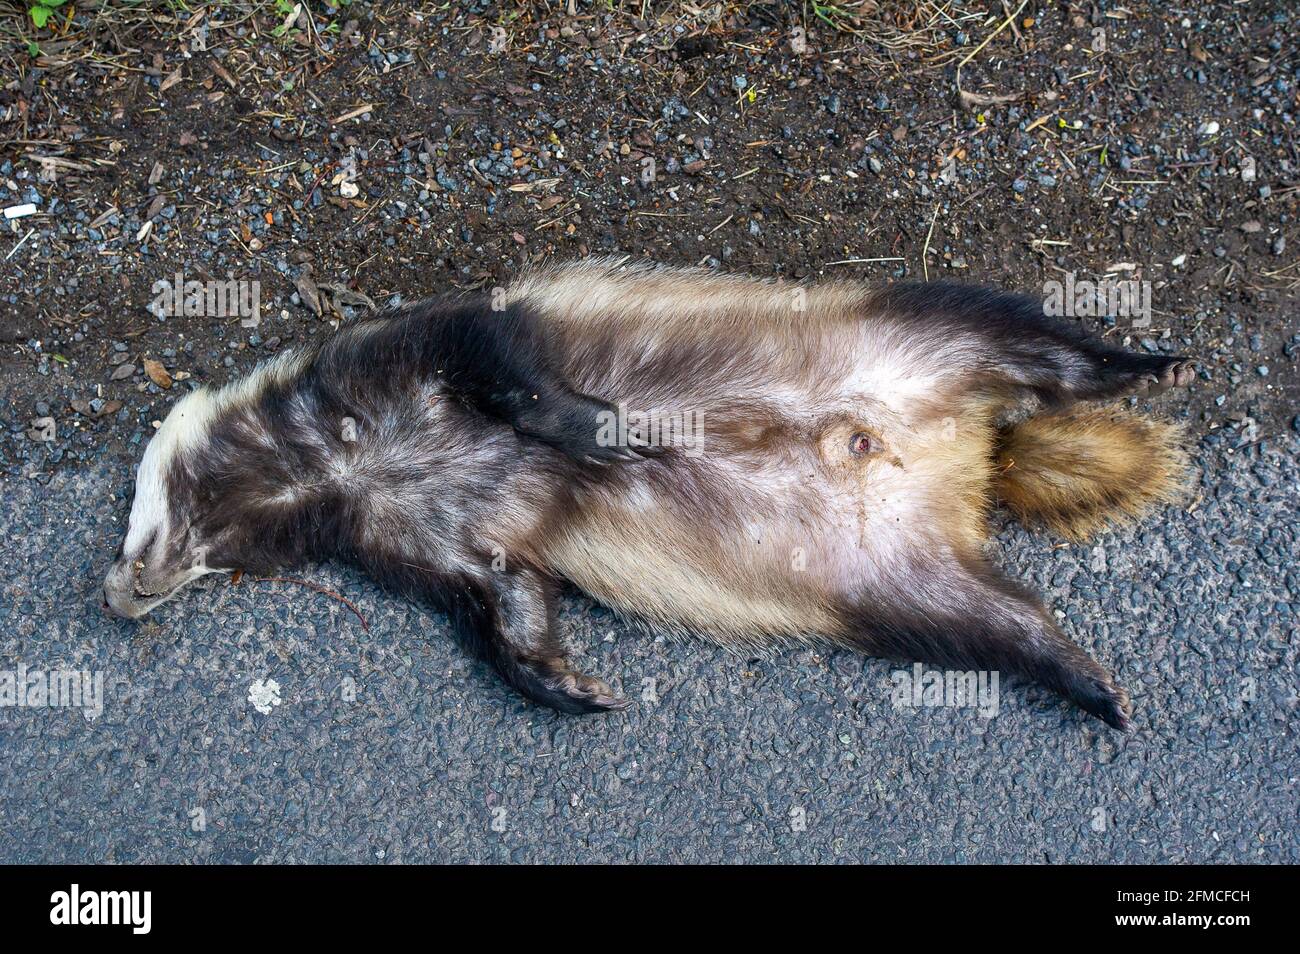 Wendover, Buckinghamshire, UK. 7th May, 2021. The tragic sight of a dead badger on the roadside in Wendover. HS2 have evicted badgers from their setts as part of the High Speed 2 rail construction. More badgers than normal are being found dead by the roadside as they are forced to find new homes. Credit: Maureen McLean/Alamy Stock Photo